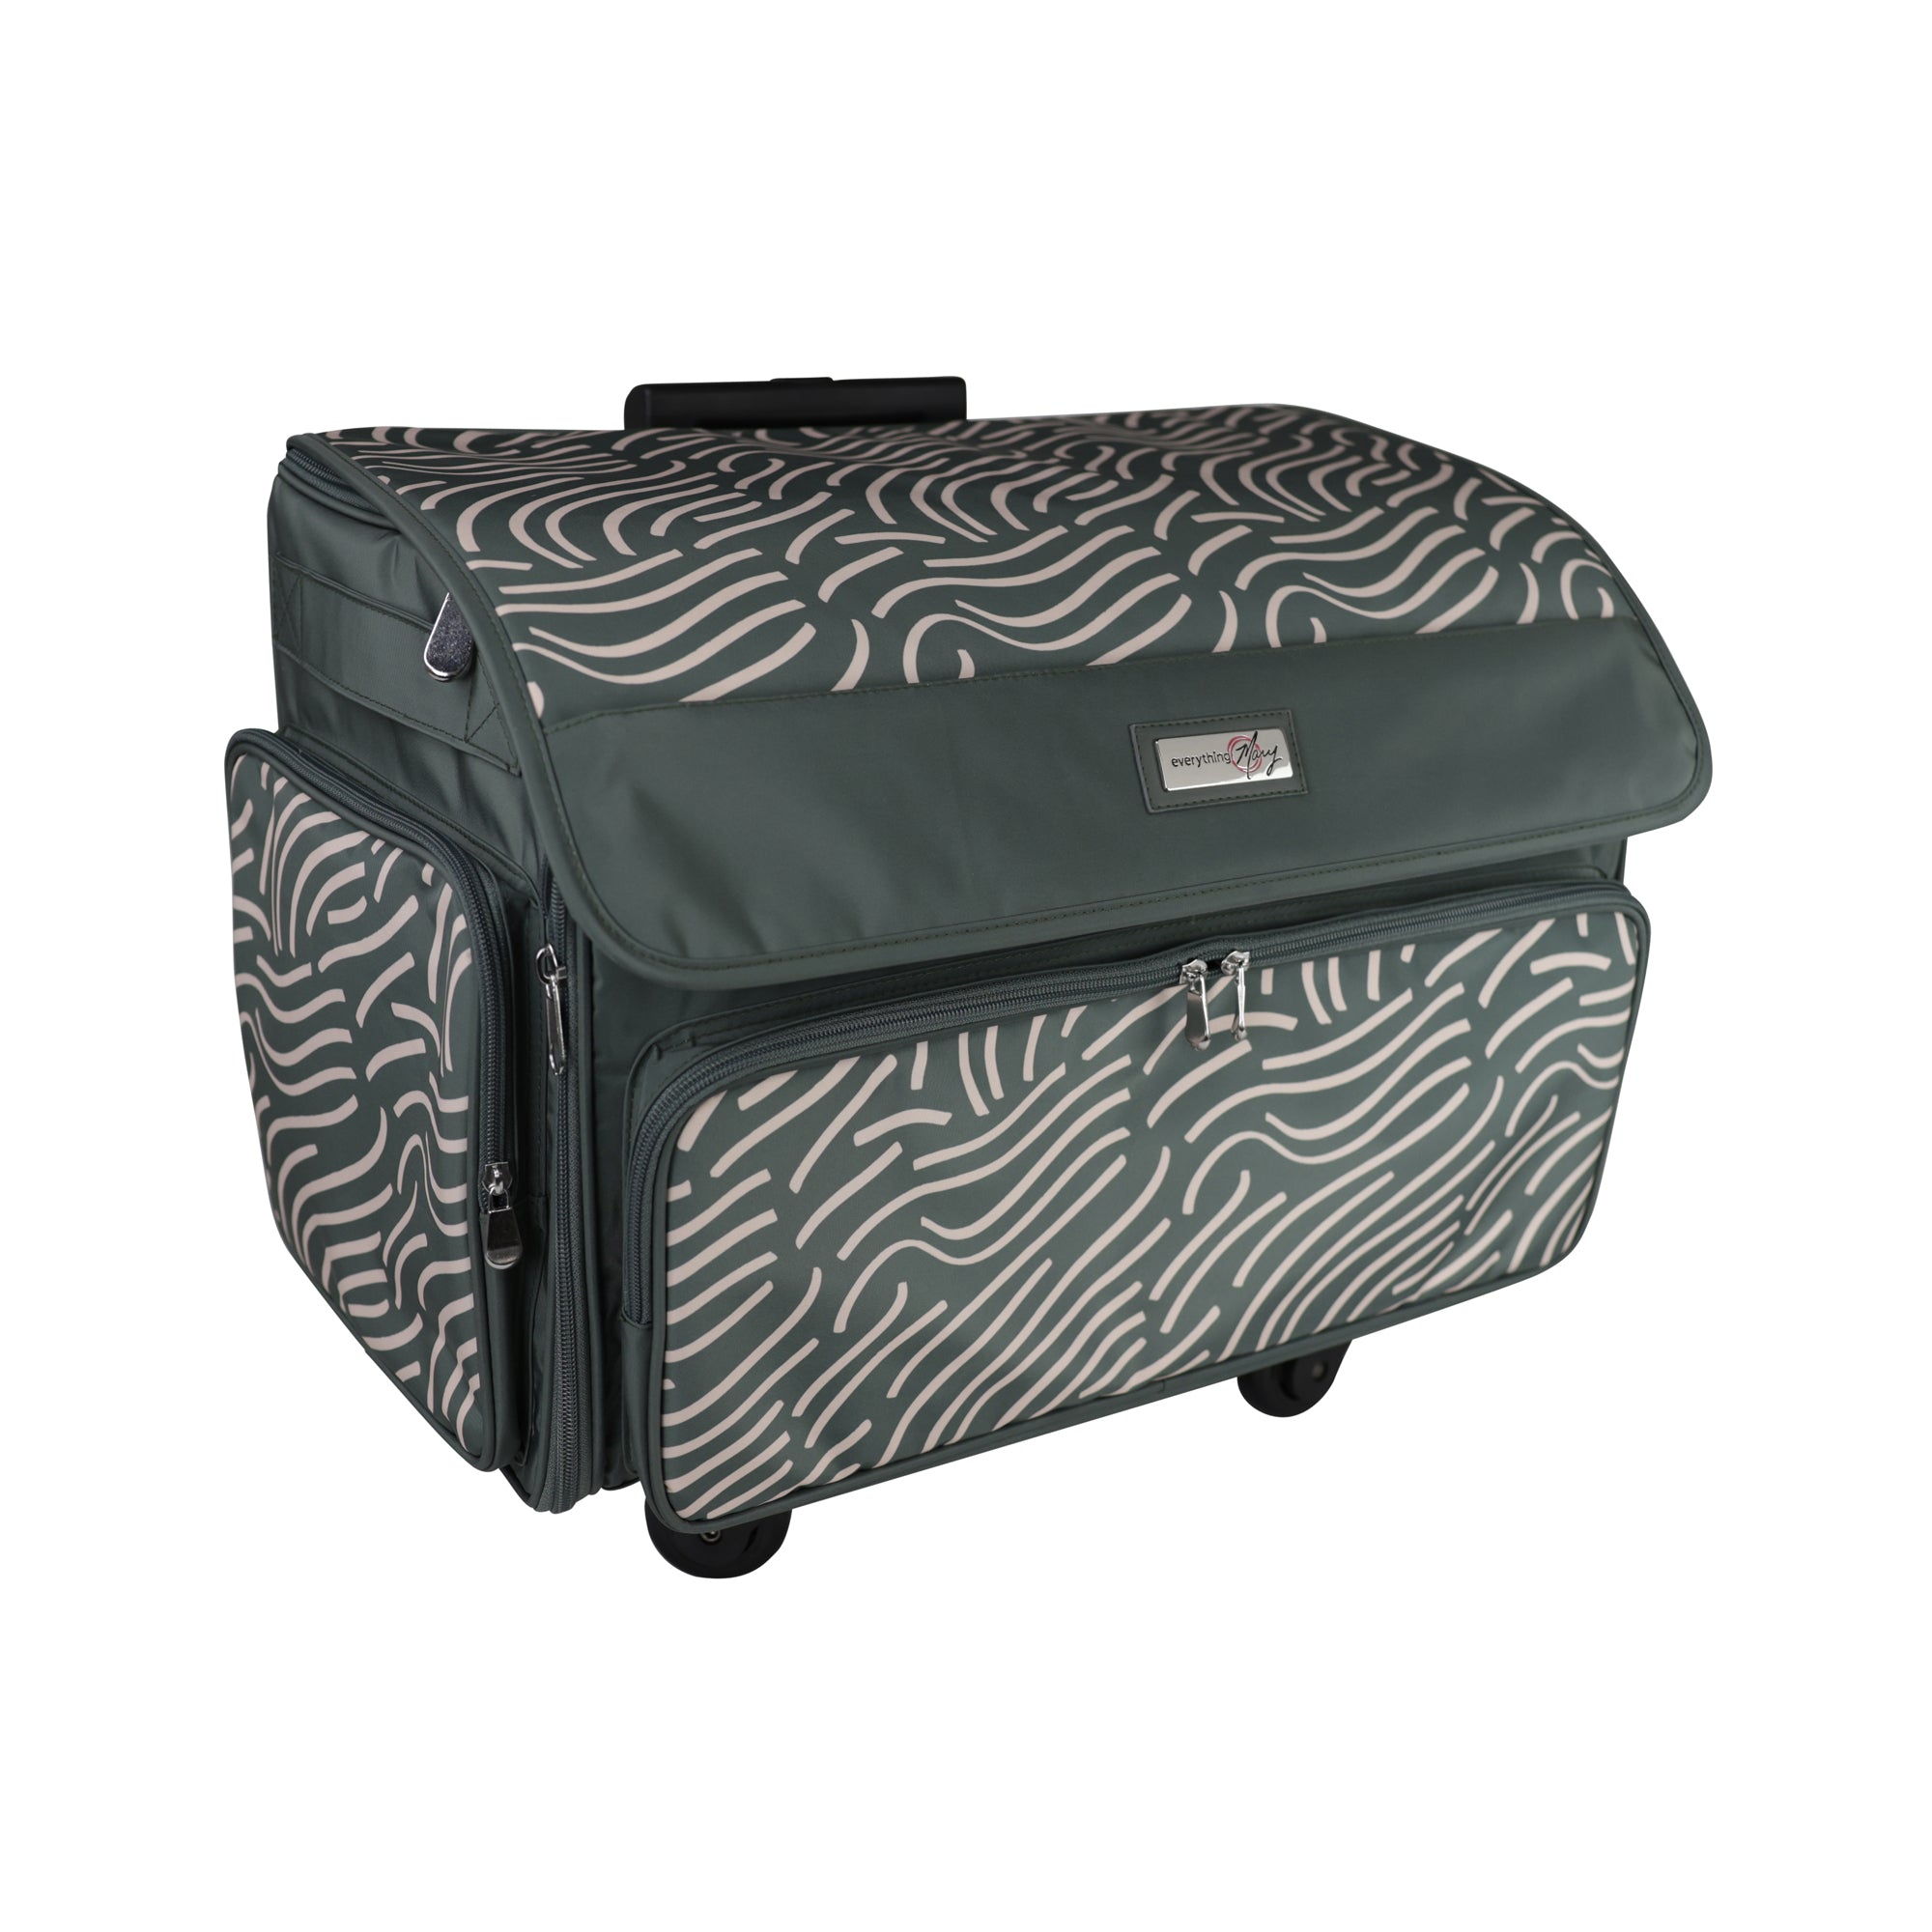  Everything Mary Collapsible Cheetah Print Rolling Sewing  Machine Tote - Sewing Machine Case Fits Most Standard Brother & Singer  Sewing Machines, Sewing Bag with Wheels & Handle : Arts, Crafts 